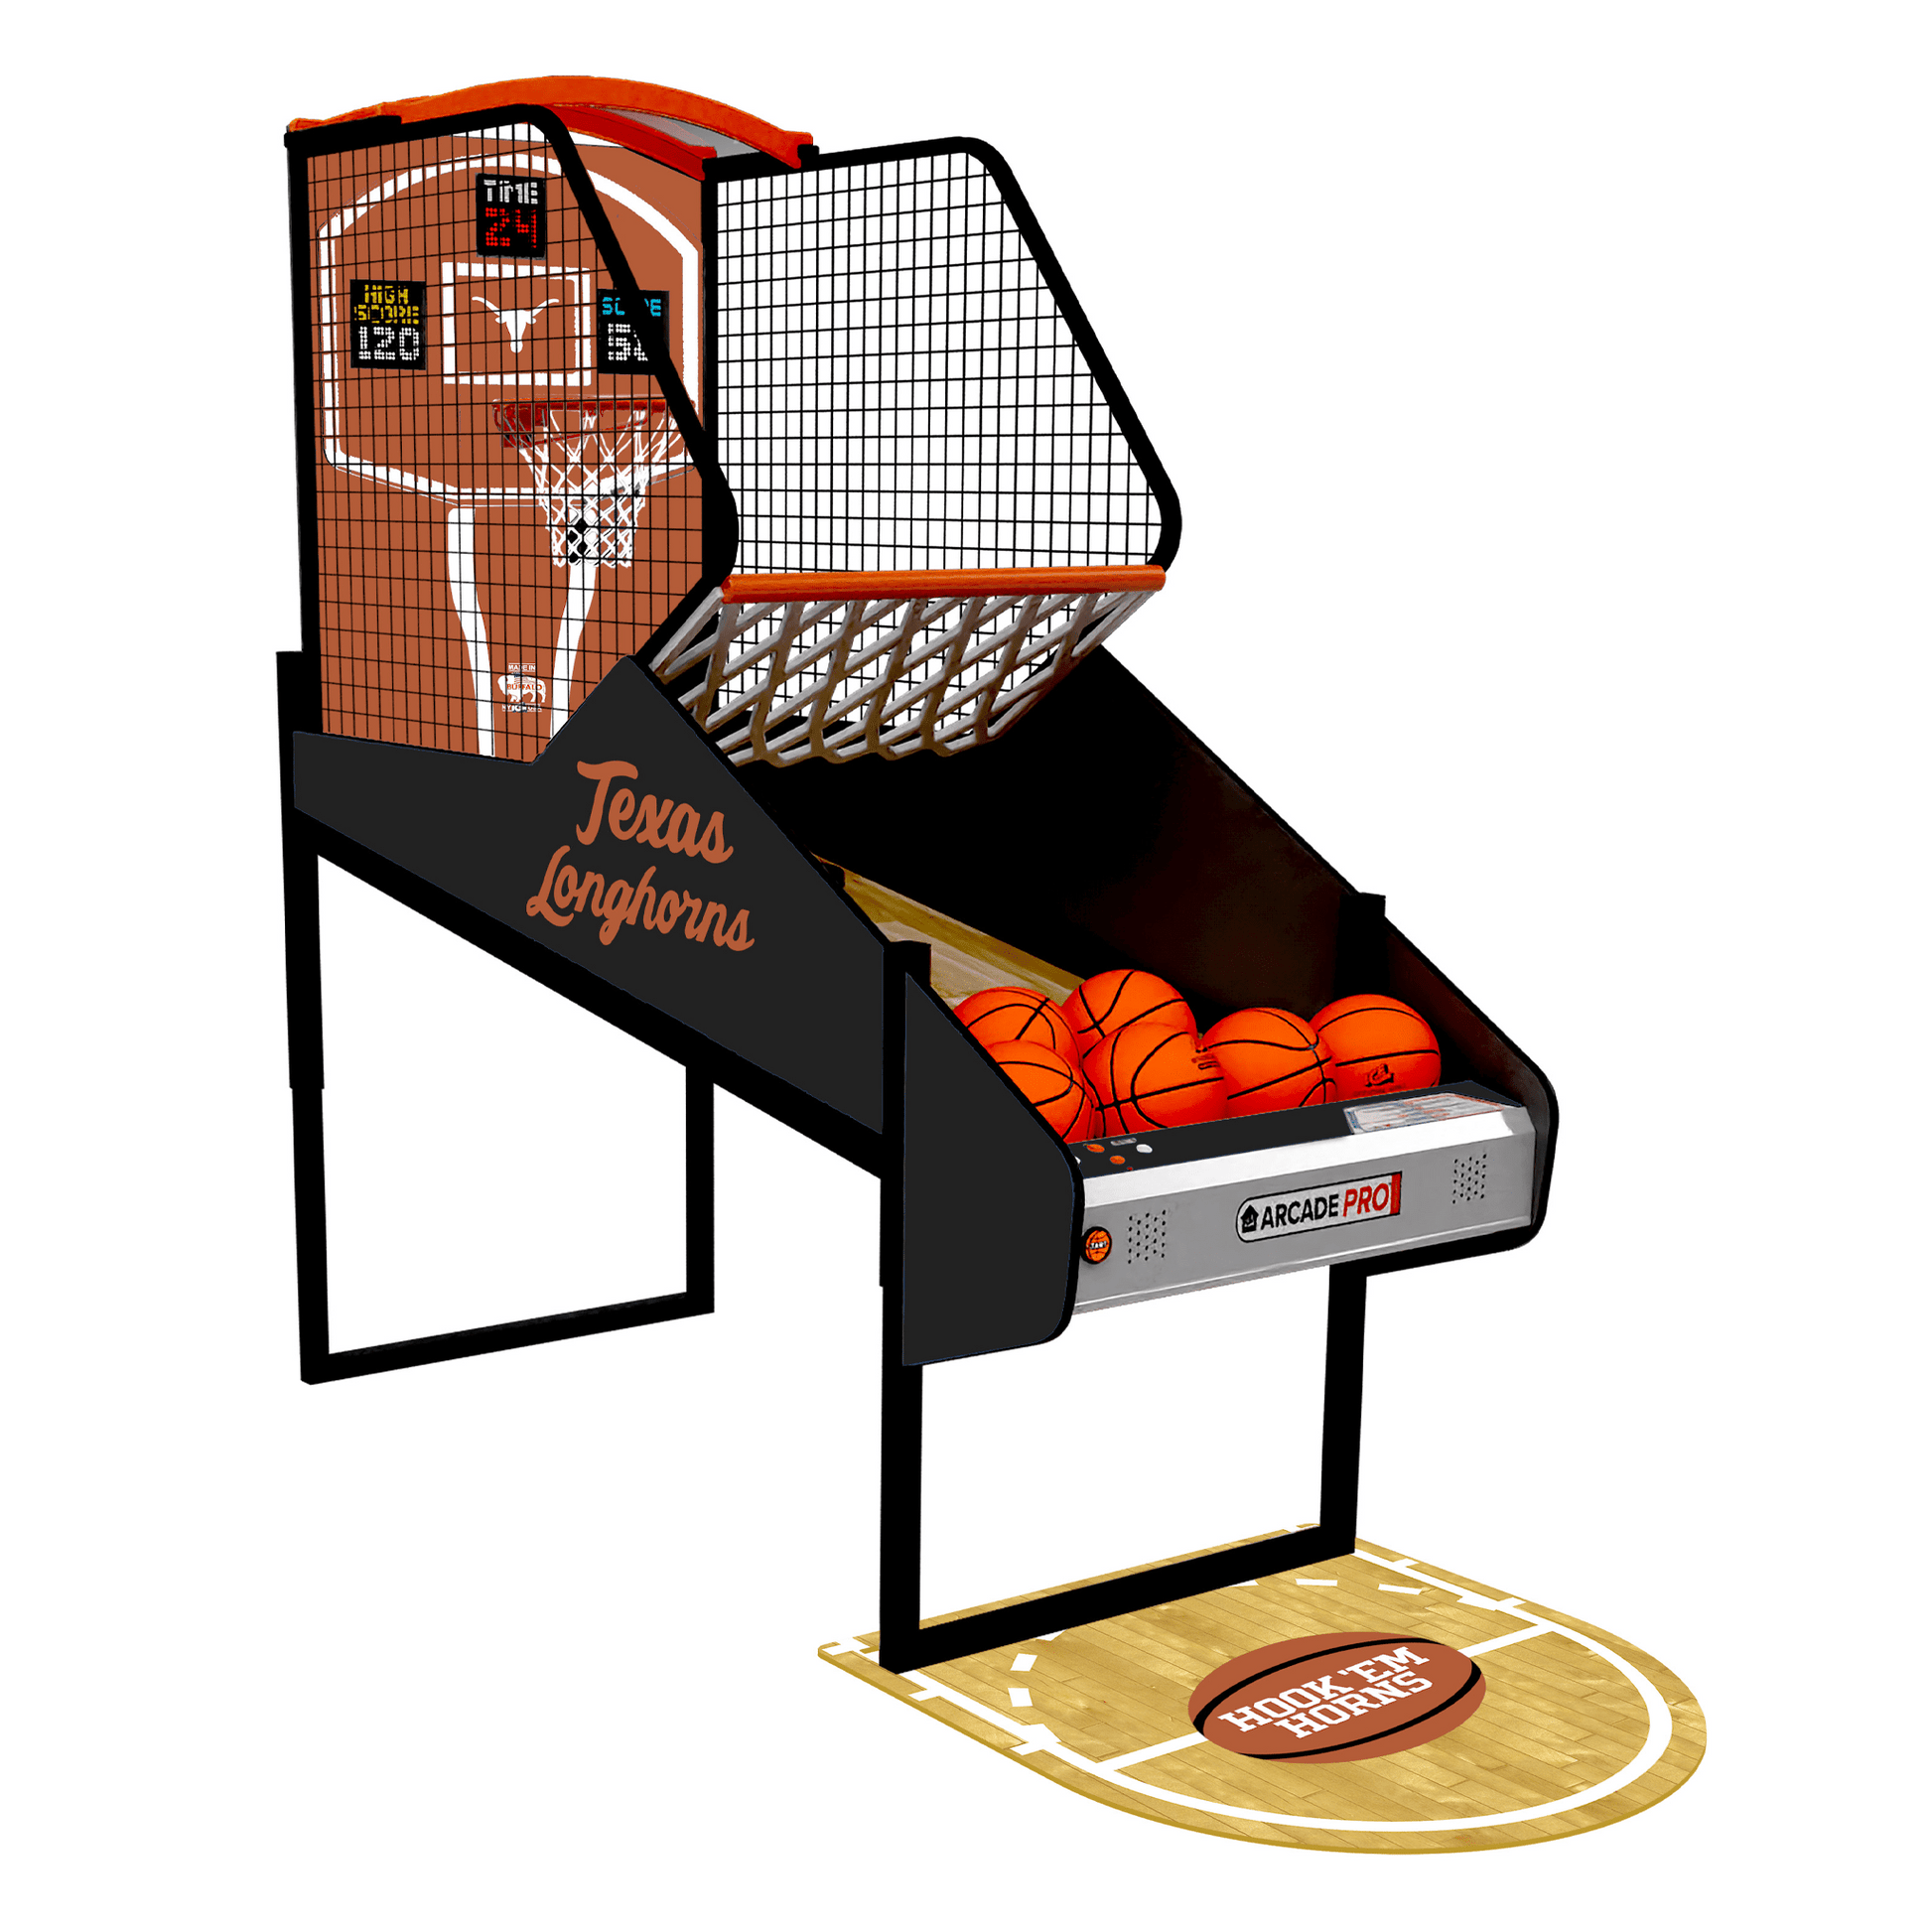 University of Texas Longhorns College Hoops Arcade Innovative Concepts in Entertainment   